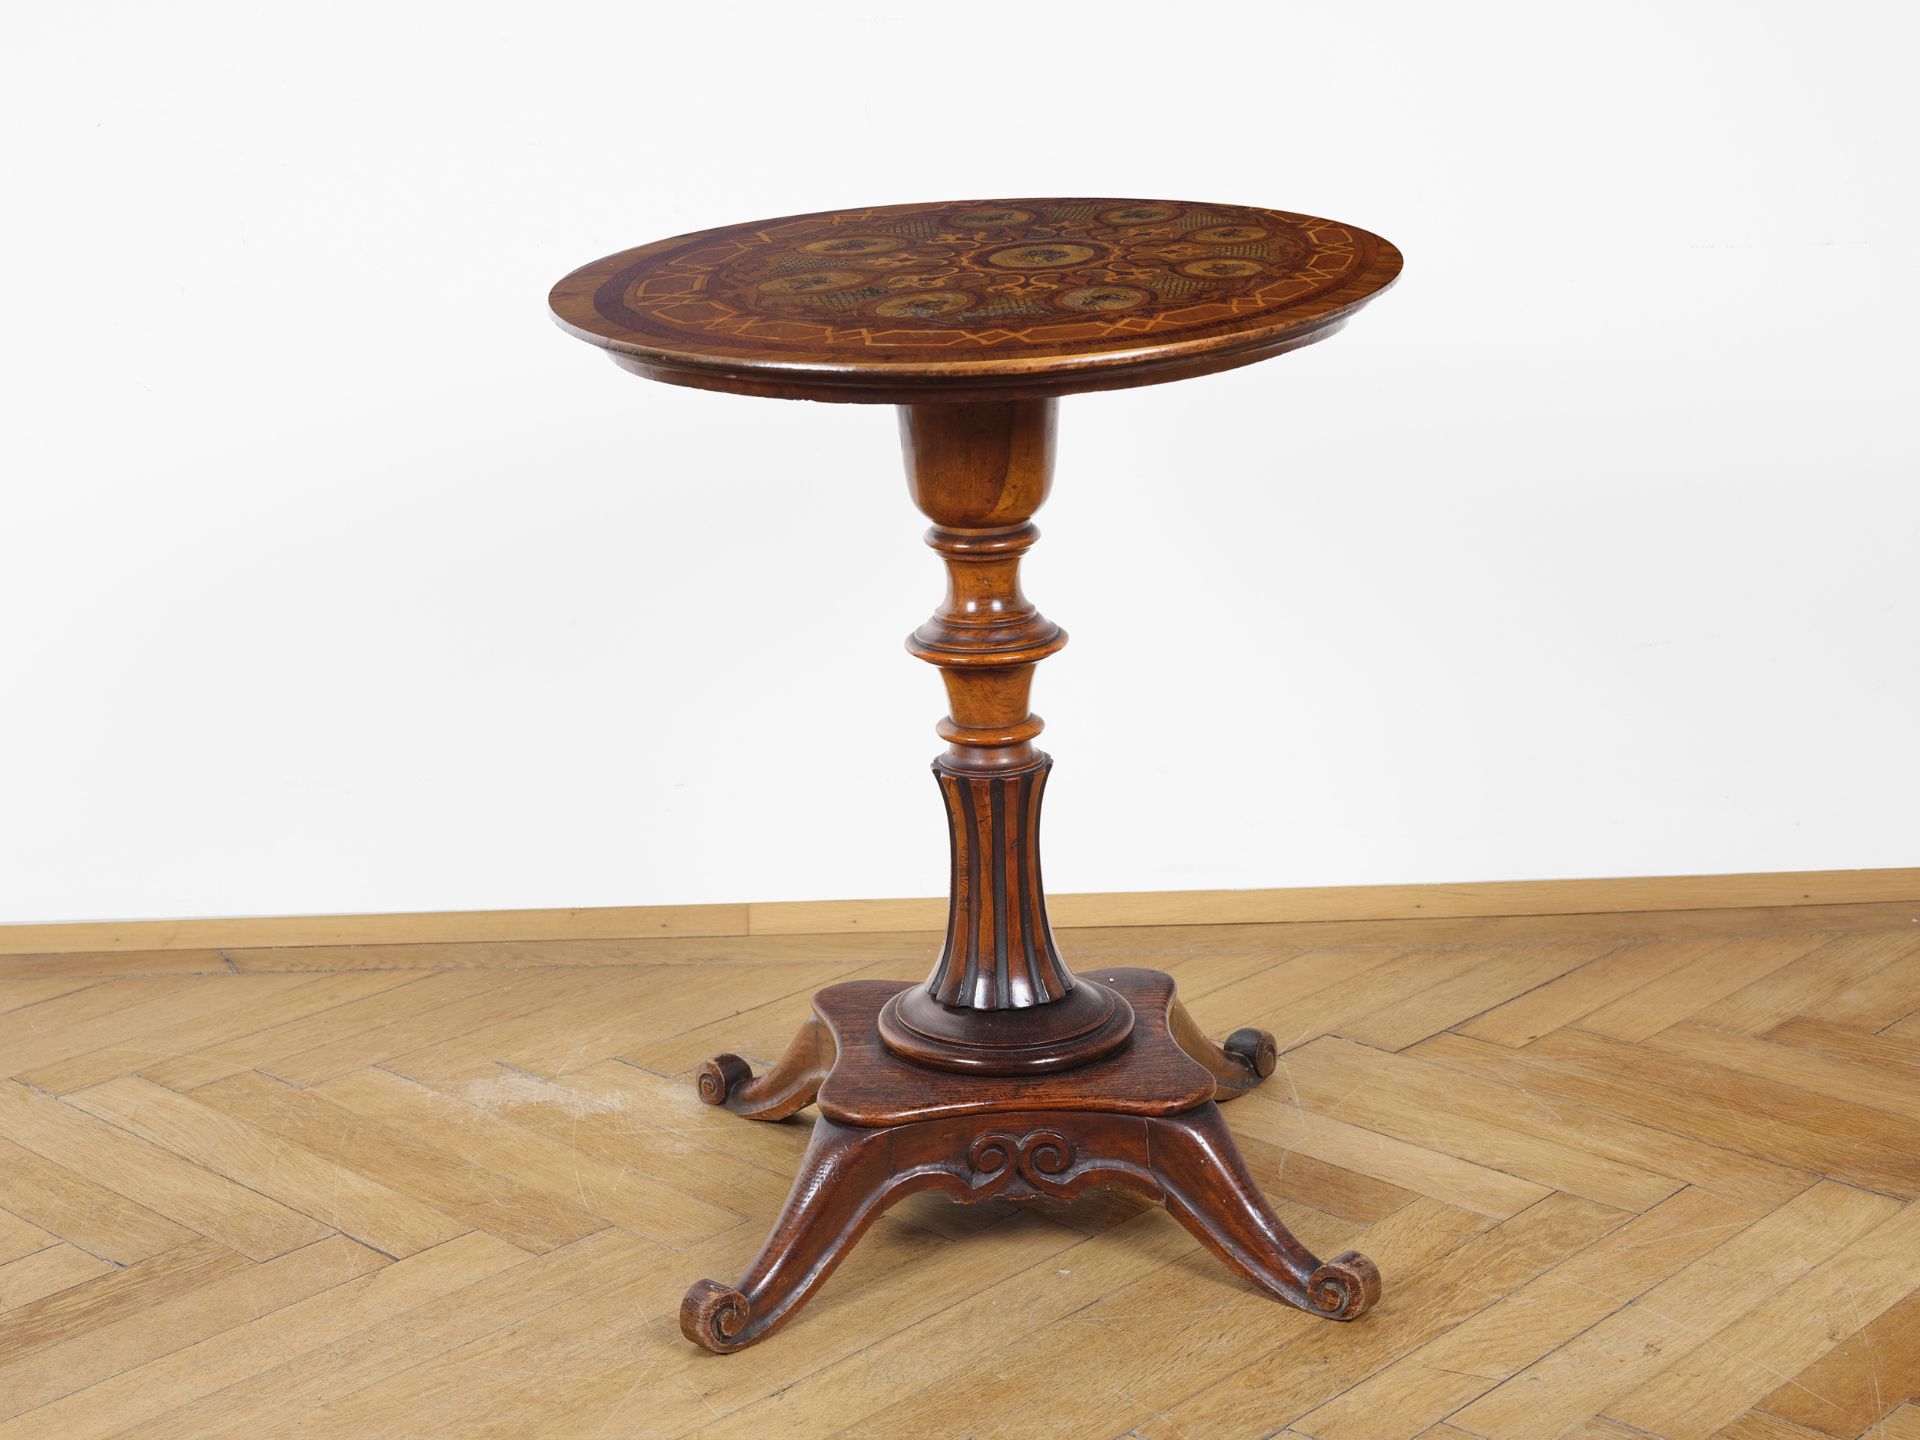 Small round side table with butterflies, Italy, mid 19th century - Image 2 of 2